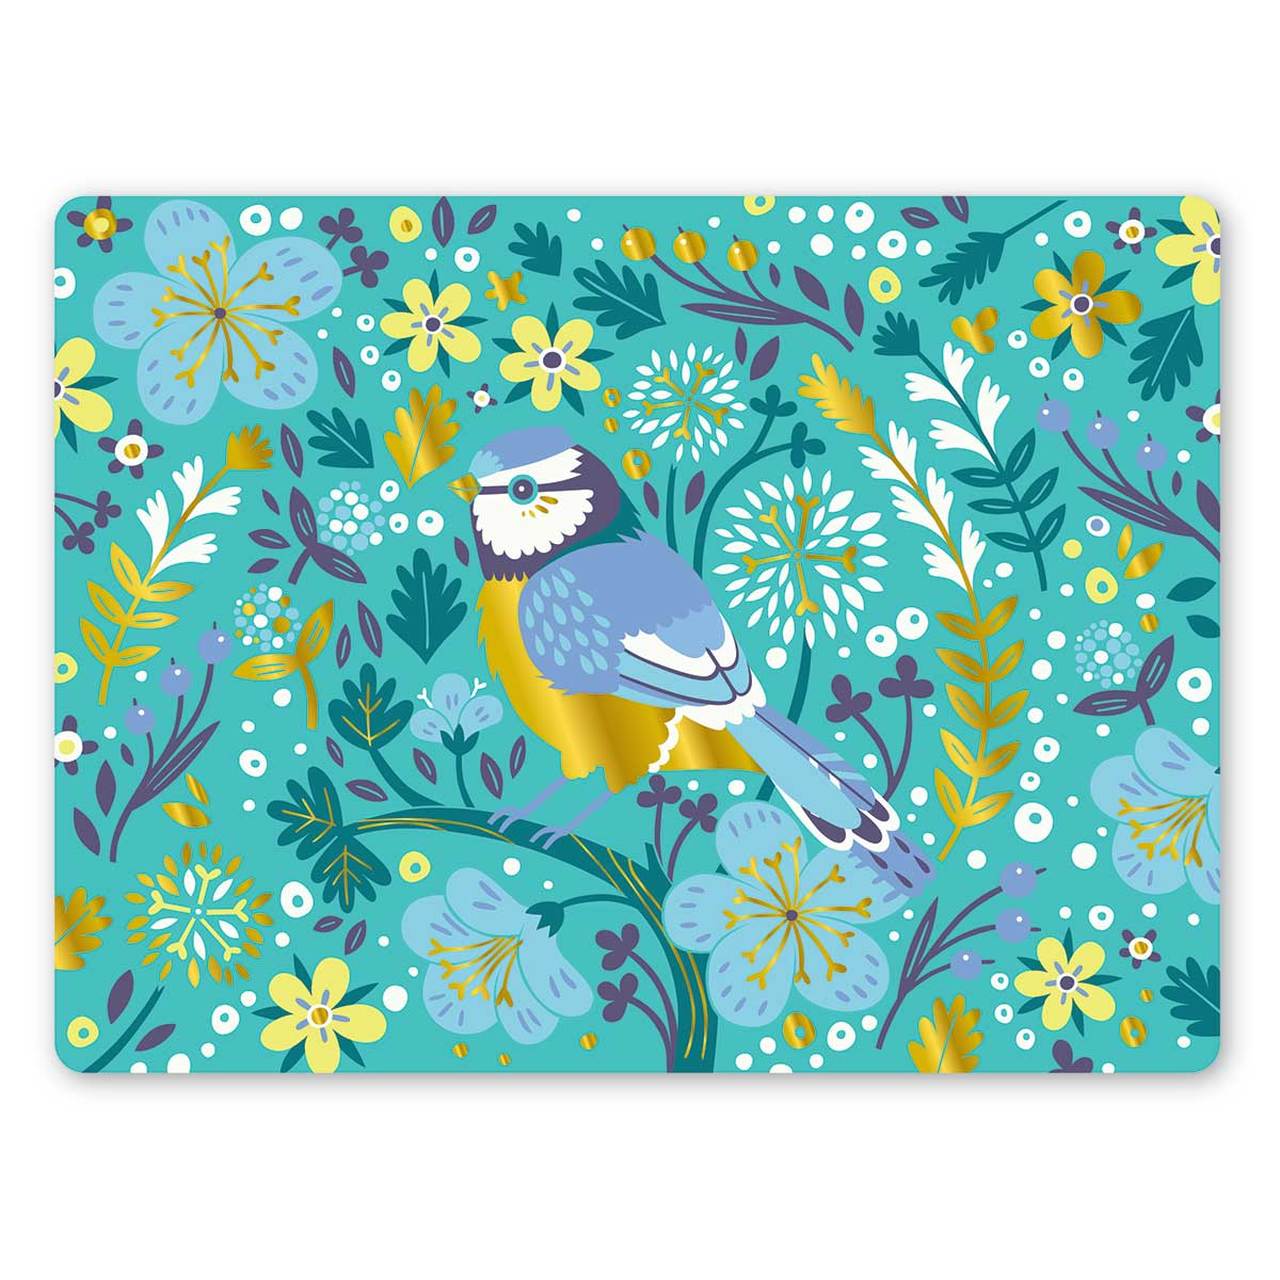 Tipperary Crystal Birdy Set of 6 Placemats  The Birdy Collection is a vibrant collection of rose gold showcasing the Birdy designs  The Birdy Collection is a series of 6 exclusively commissioned illustrations inspired by native Irish birds; Bullfinch, Goldfinch, Blue tit, Greenfinch, Kingfisher and Robin.